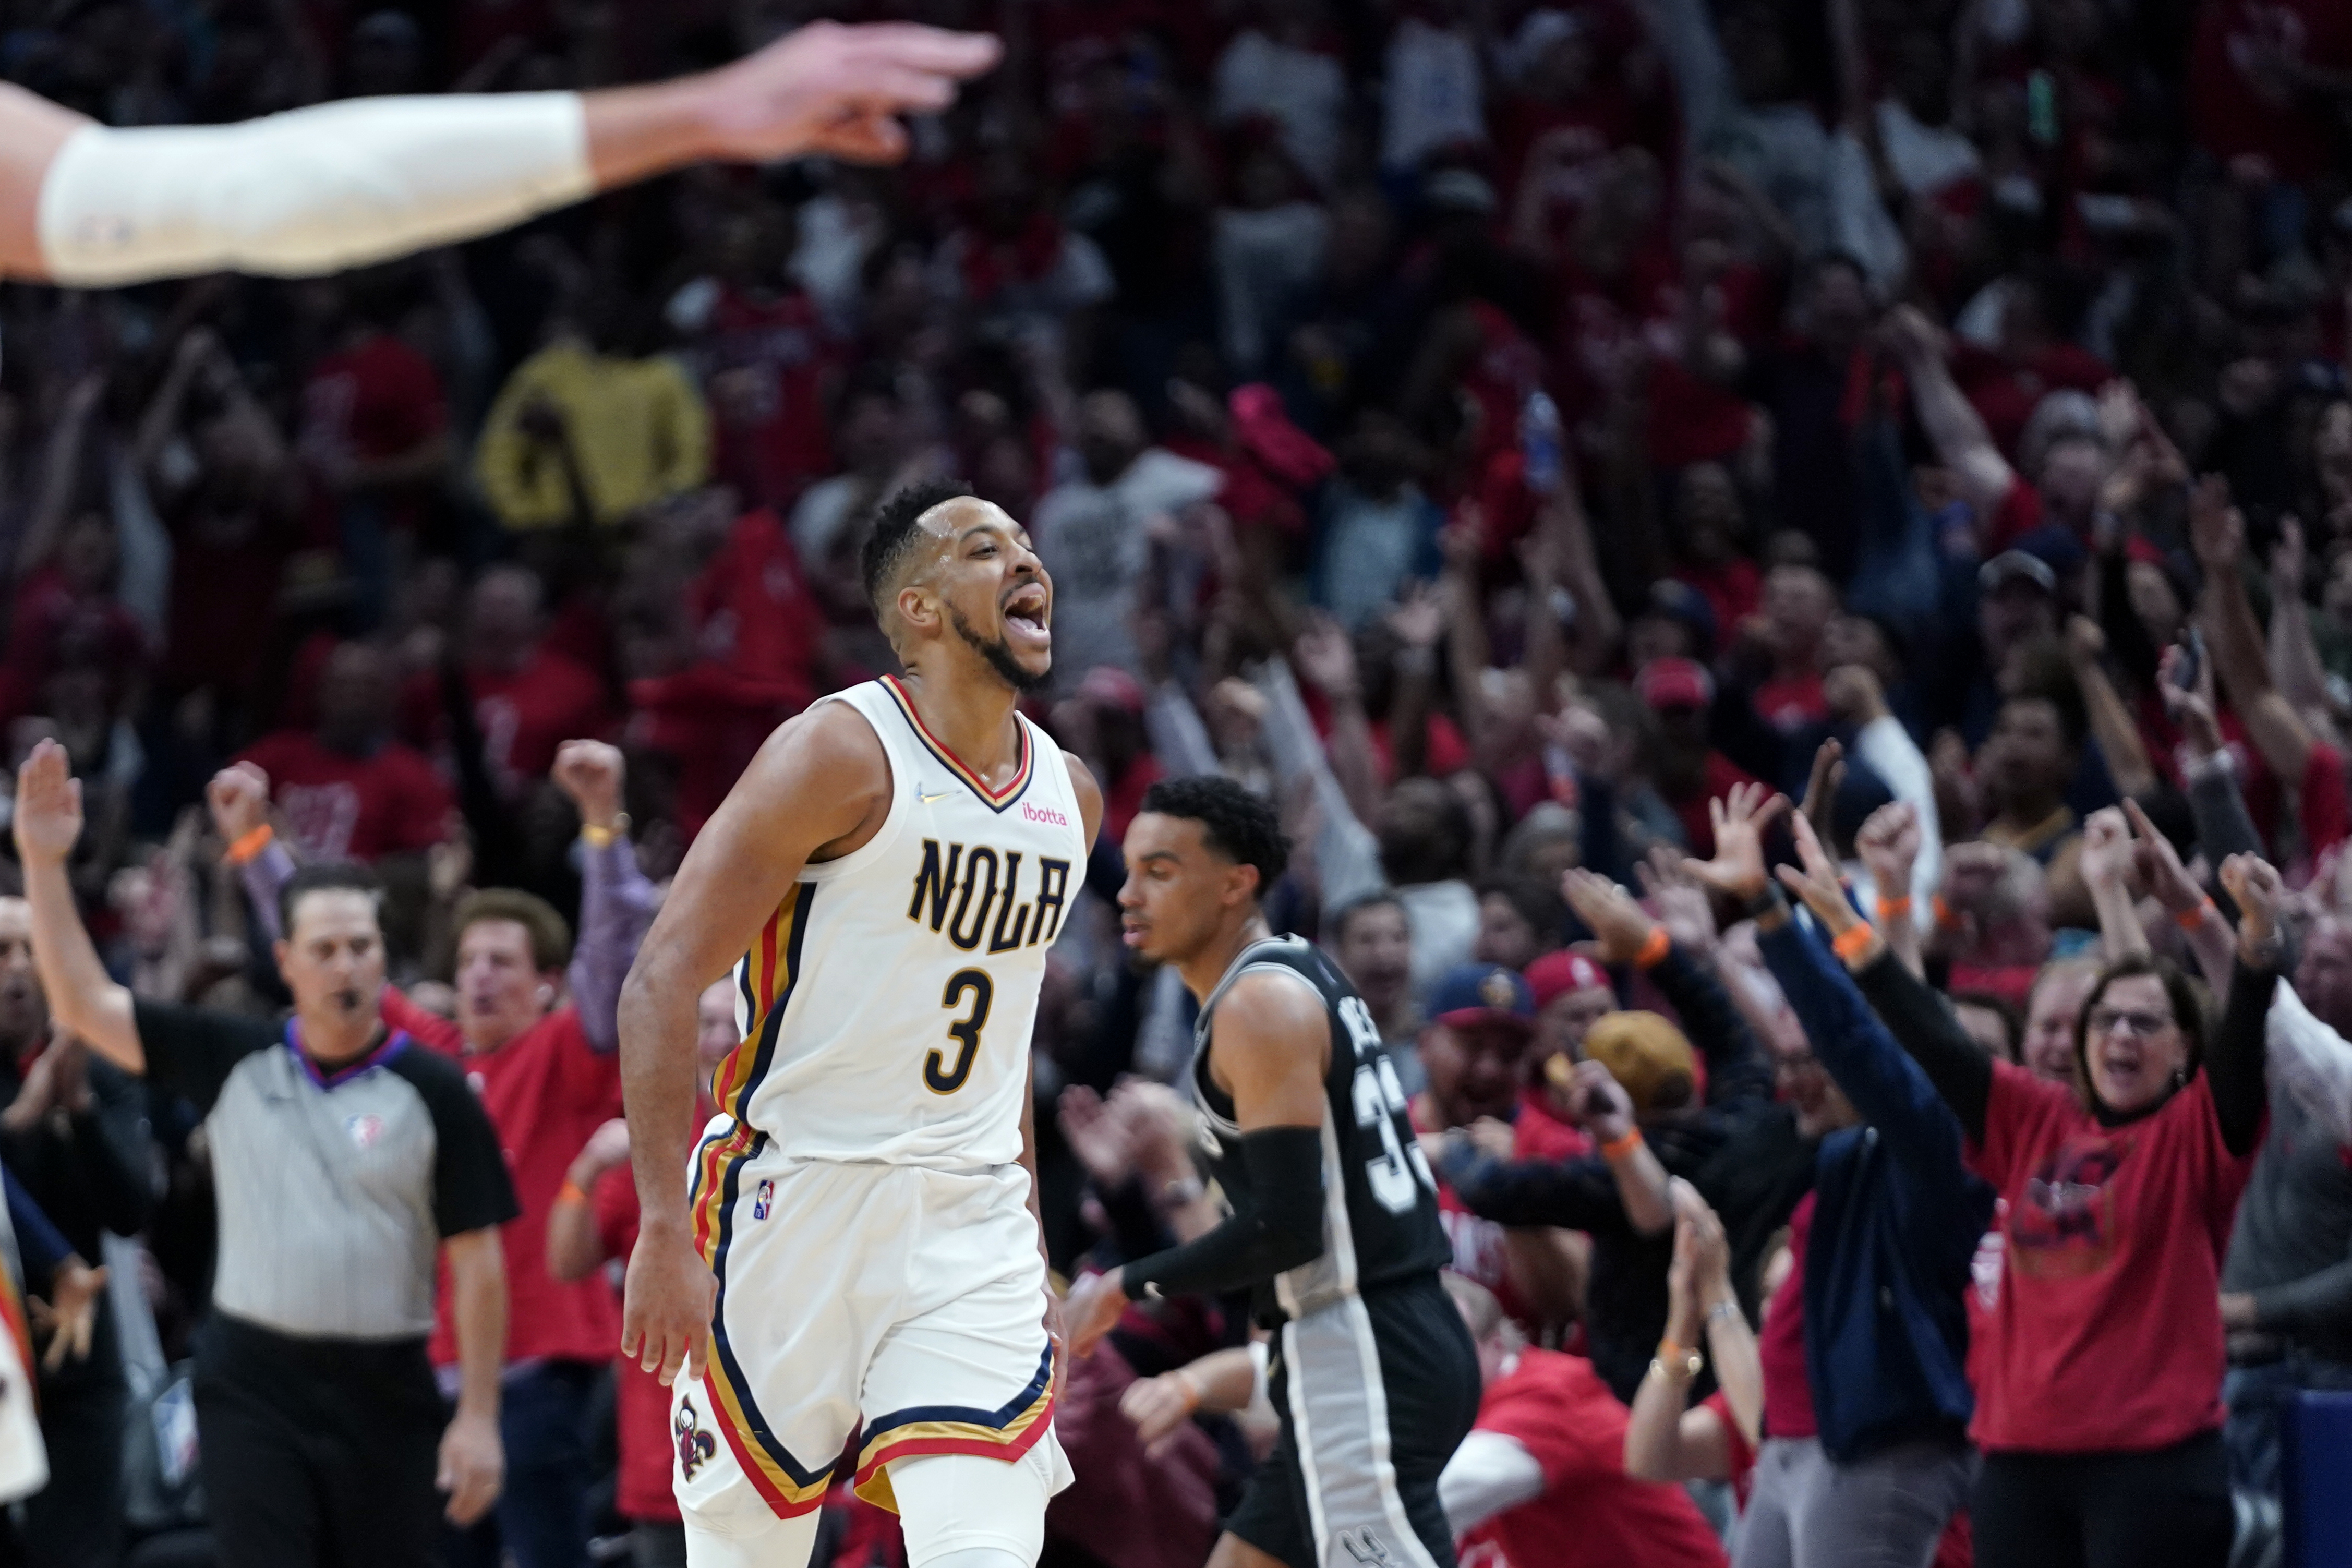 NBA playoffs 2022 Round 1 schedule, TV channels, bracket and how to watch free online without cable